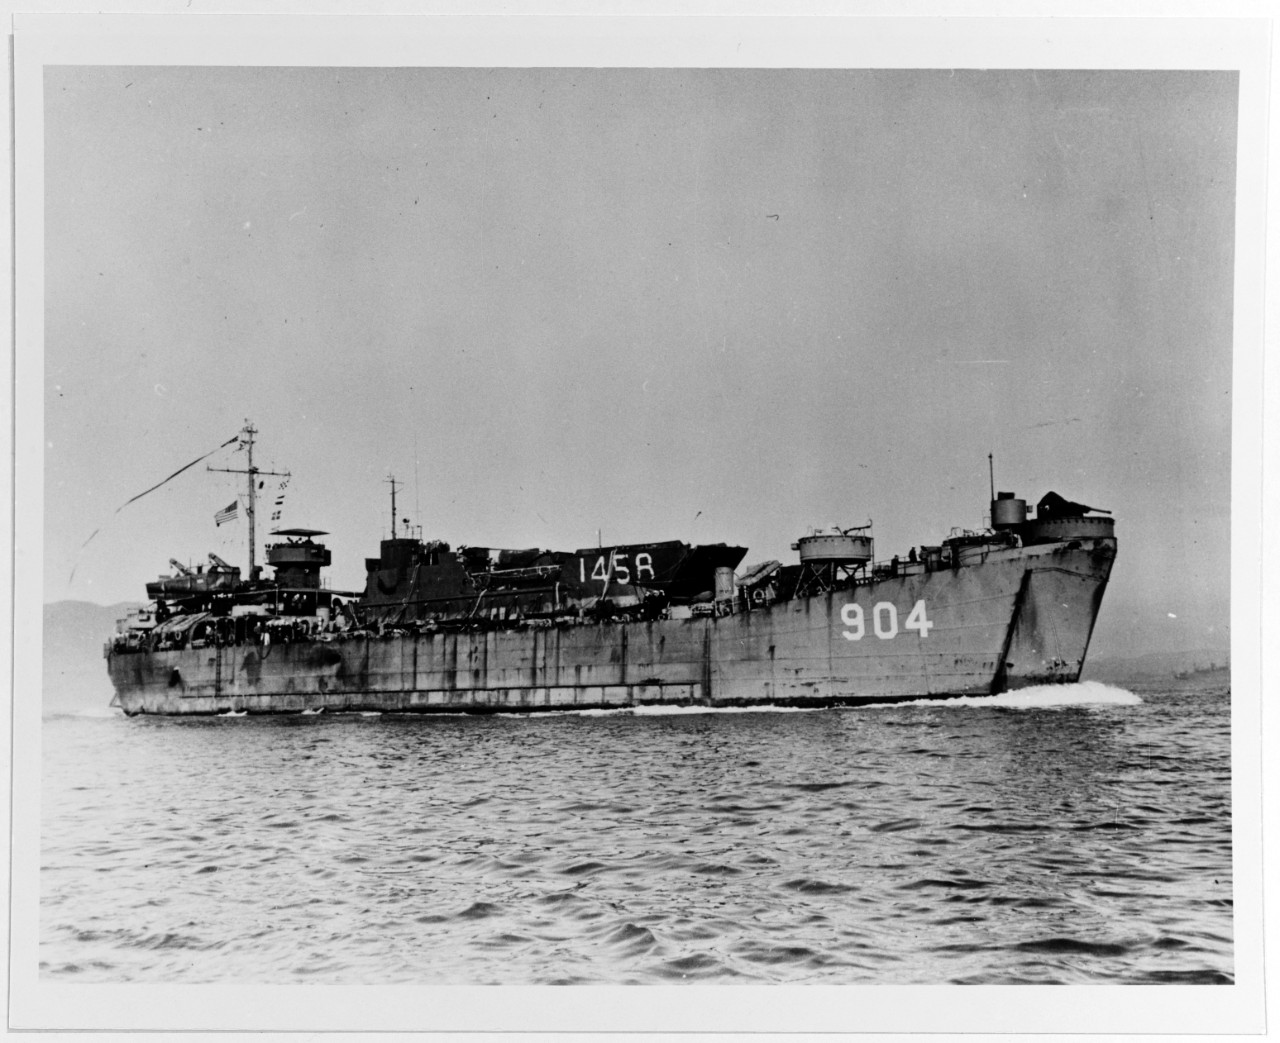 USS LST-904 (later:  LYON COUNTY)